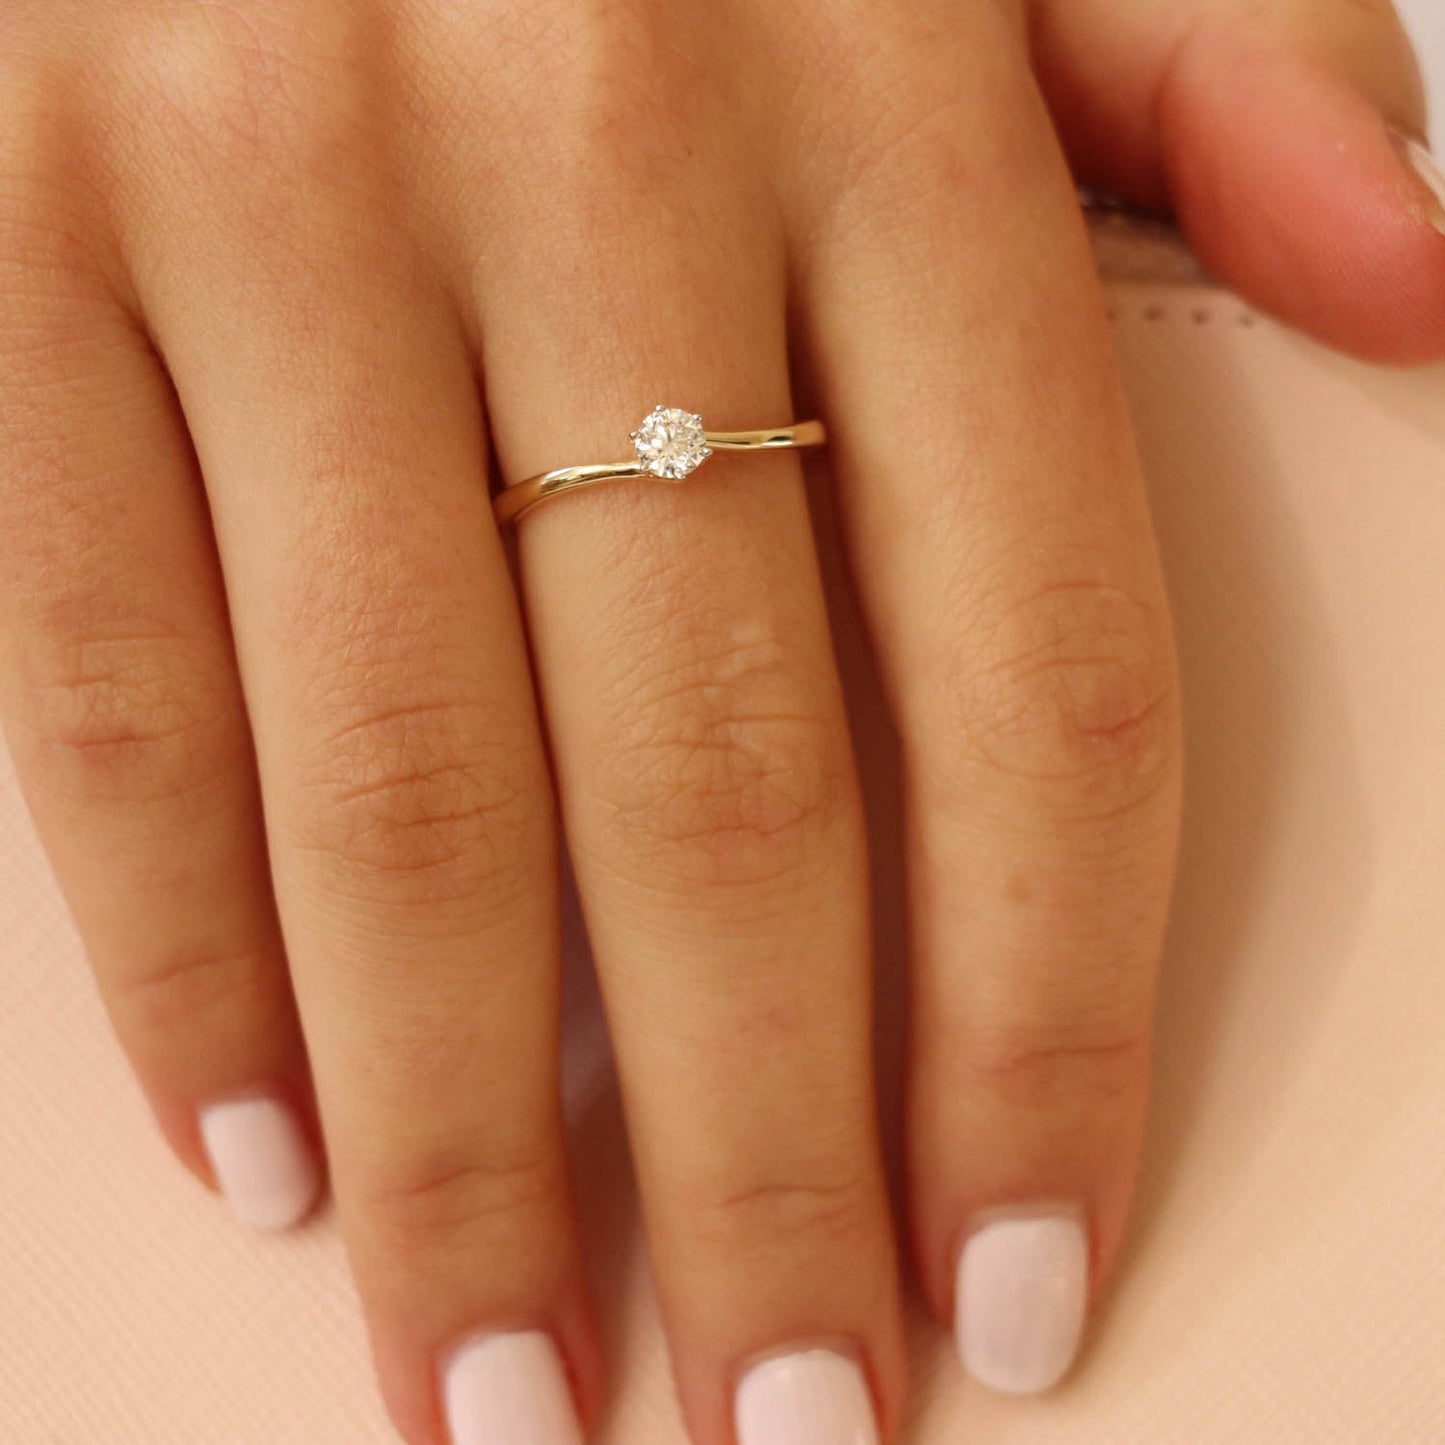 Solitaire Ring with 0.33ct Diamond in 9K Yellow Gold